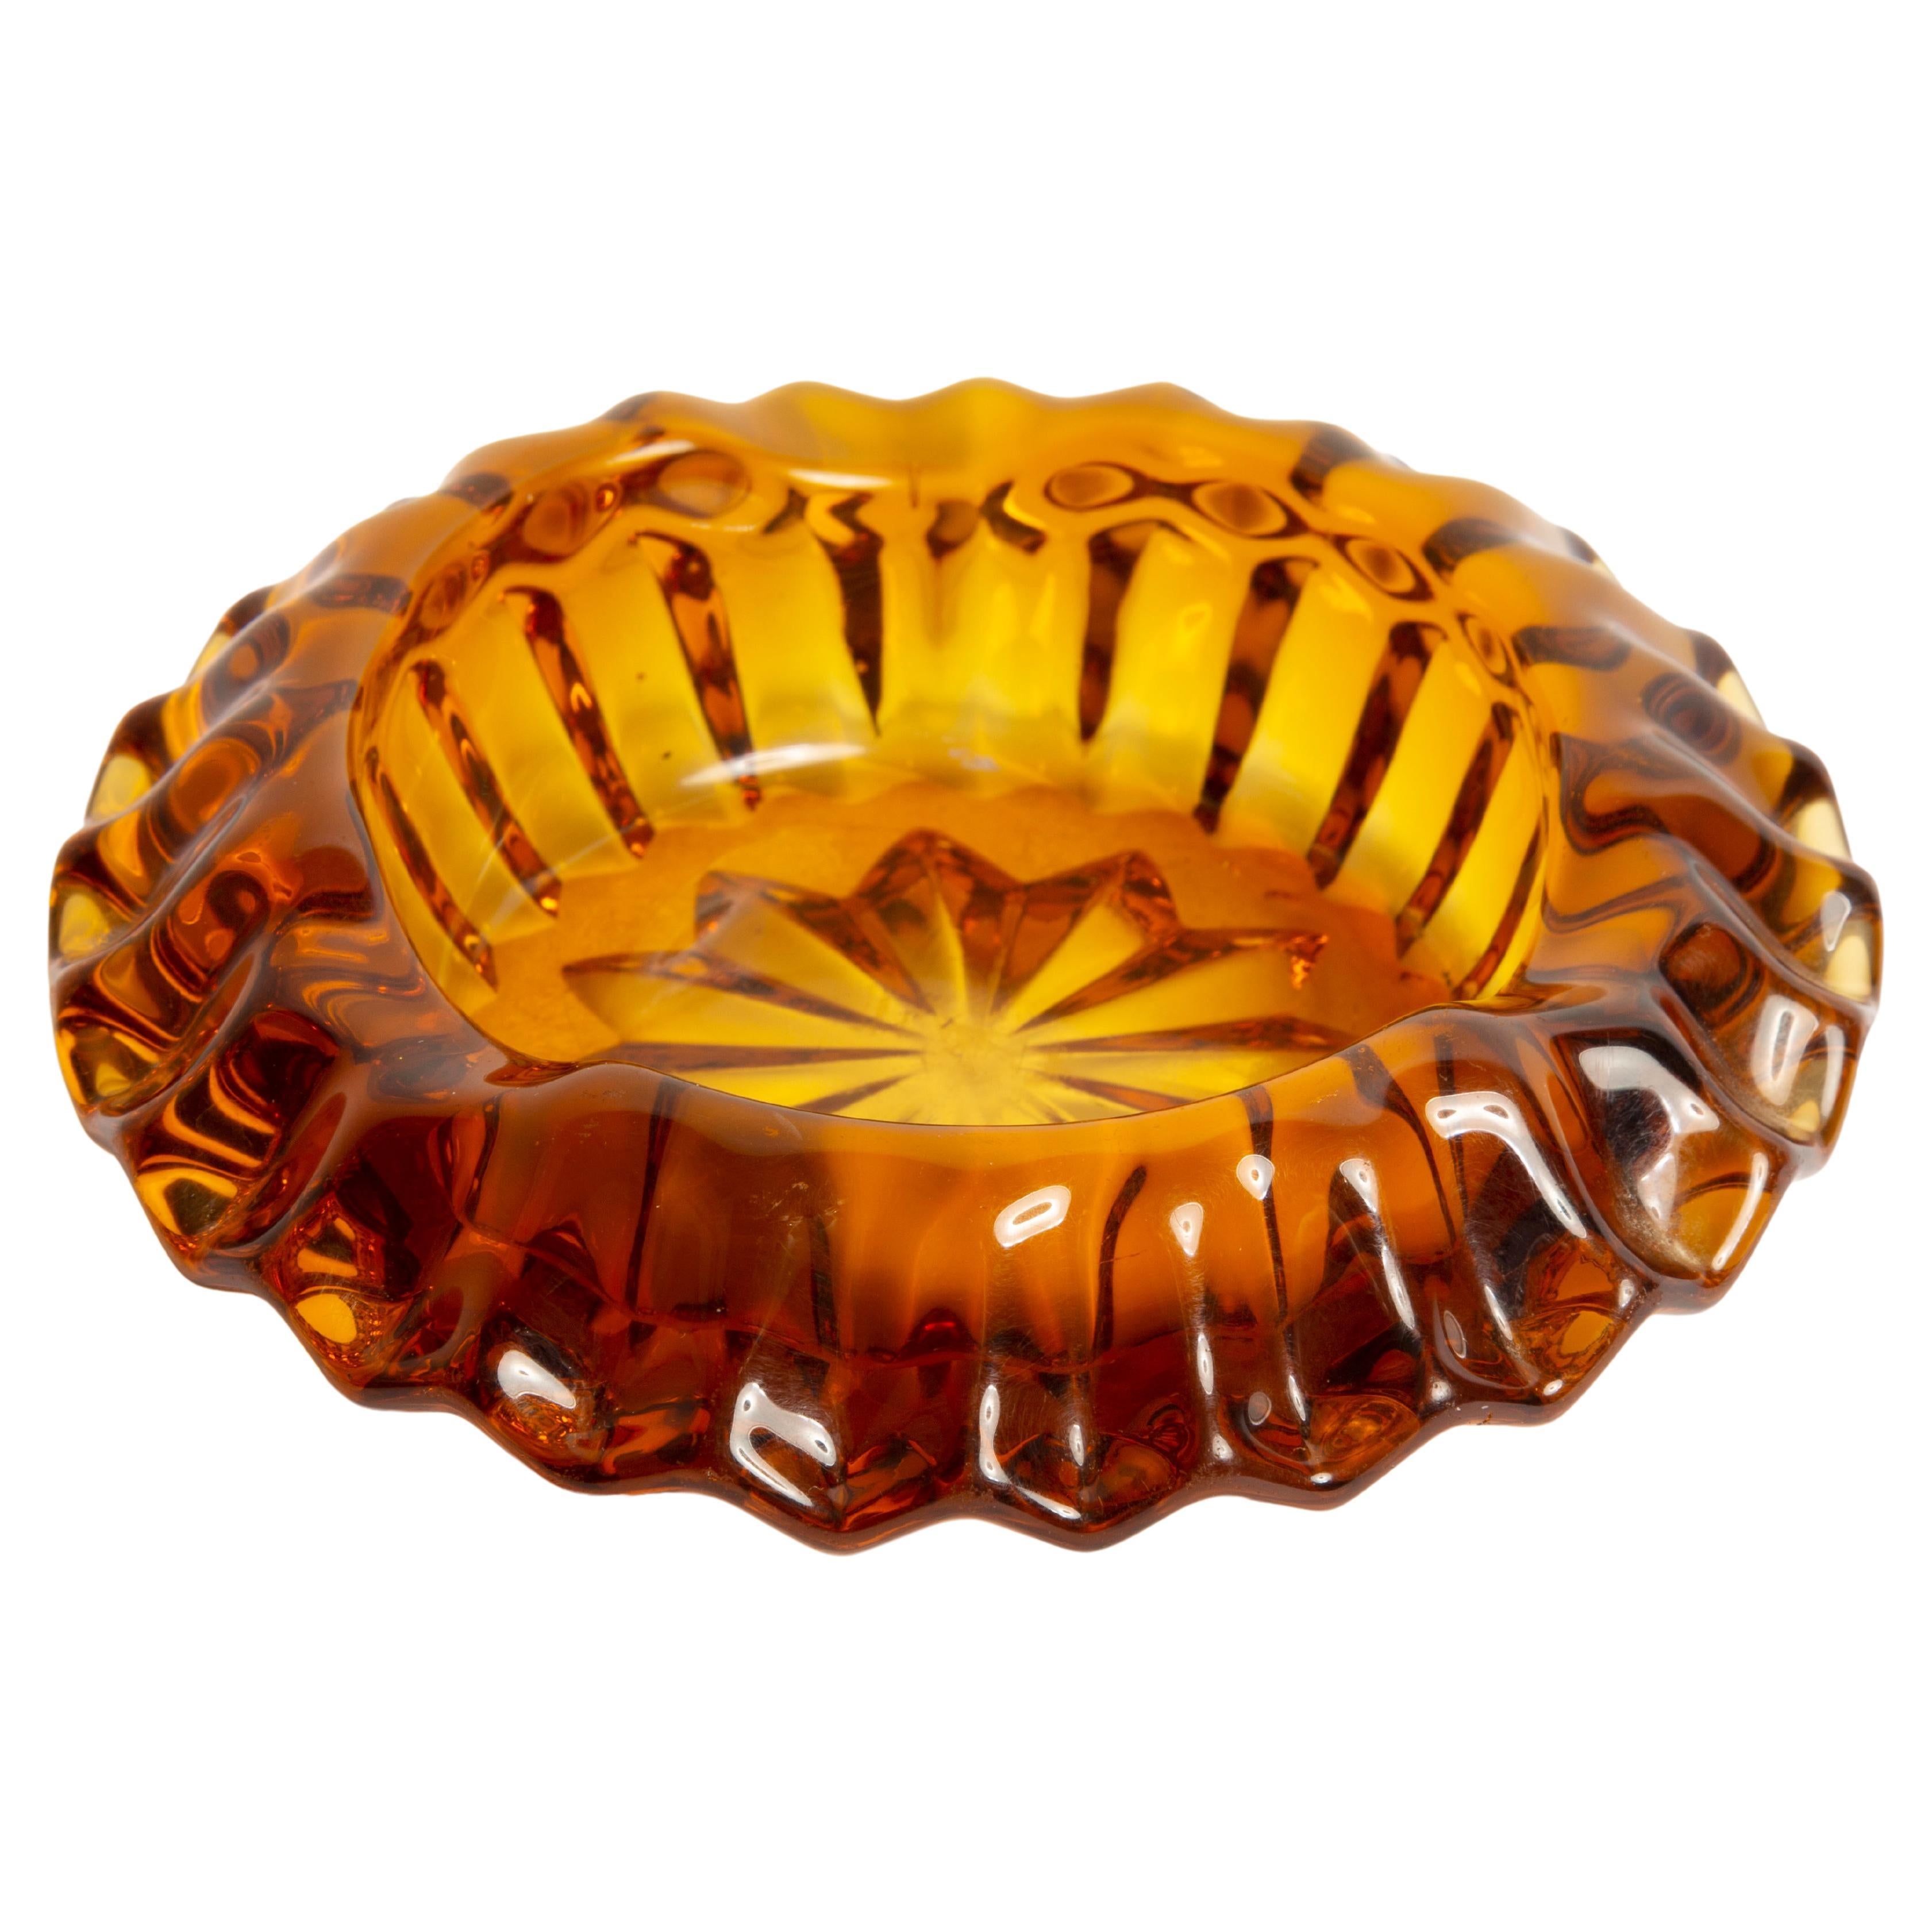 Midcentury Crystal Mustard Yellow Glass Bowl Ashtray, Italy, 1970s For Sale